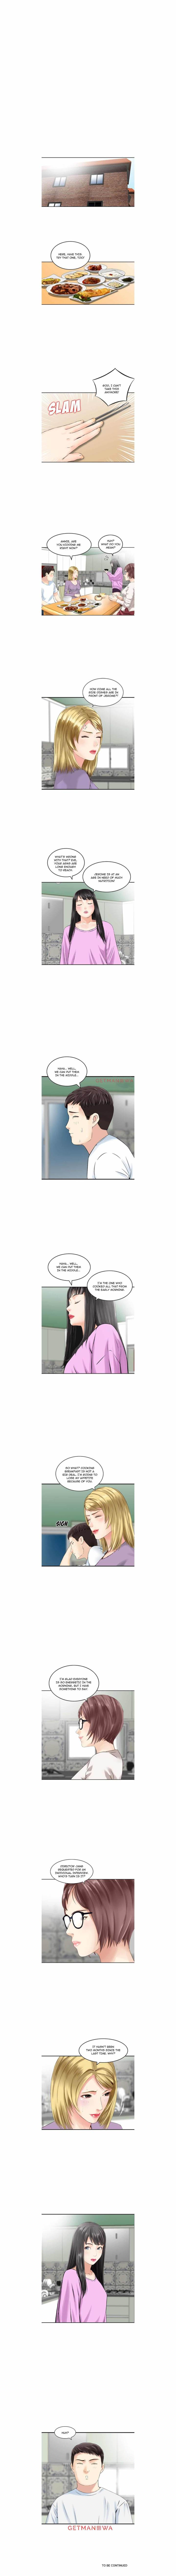 Find Me Chapter 9 - Page 3